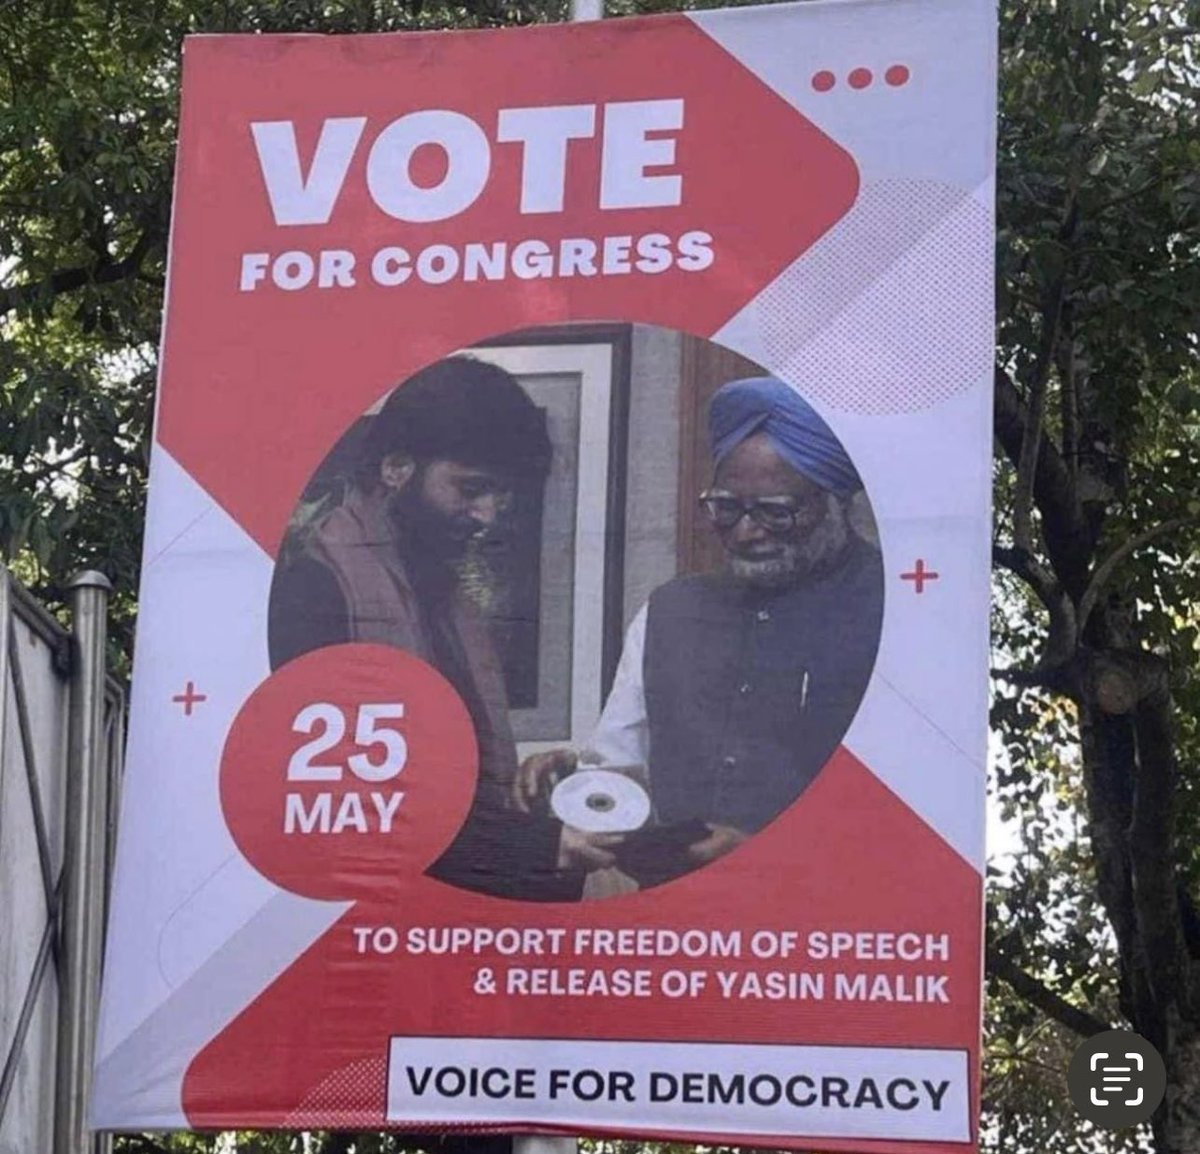 #Congress trying to win Indian election against #BJP to gain votes in the name of #FreedomOfSpeech and former PM Dr #ManmohanSingh who respects Kashmiri Hurriyat Leader #YasinMalik for his non-violence freedom struggle like Gandhi. Congress and BJP both want to won so using…